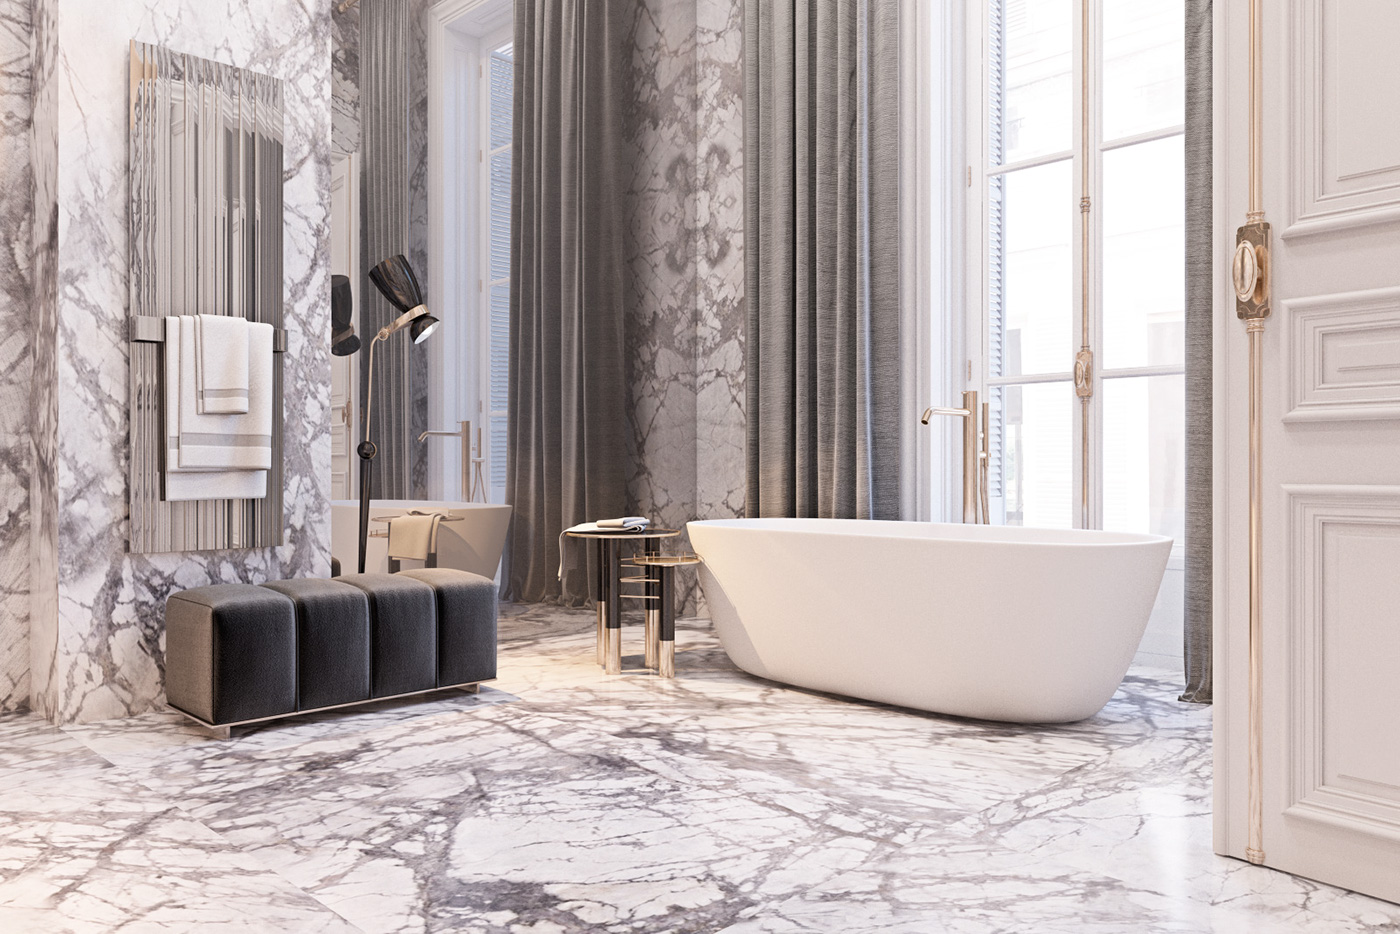 marble finish luxury bathroom with large windows, and high ceilings and freestanding bath